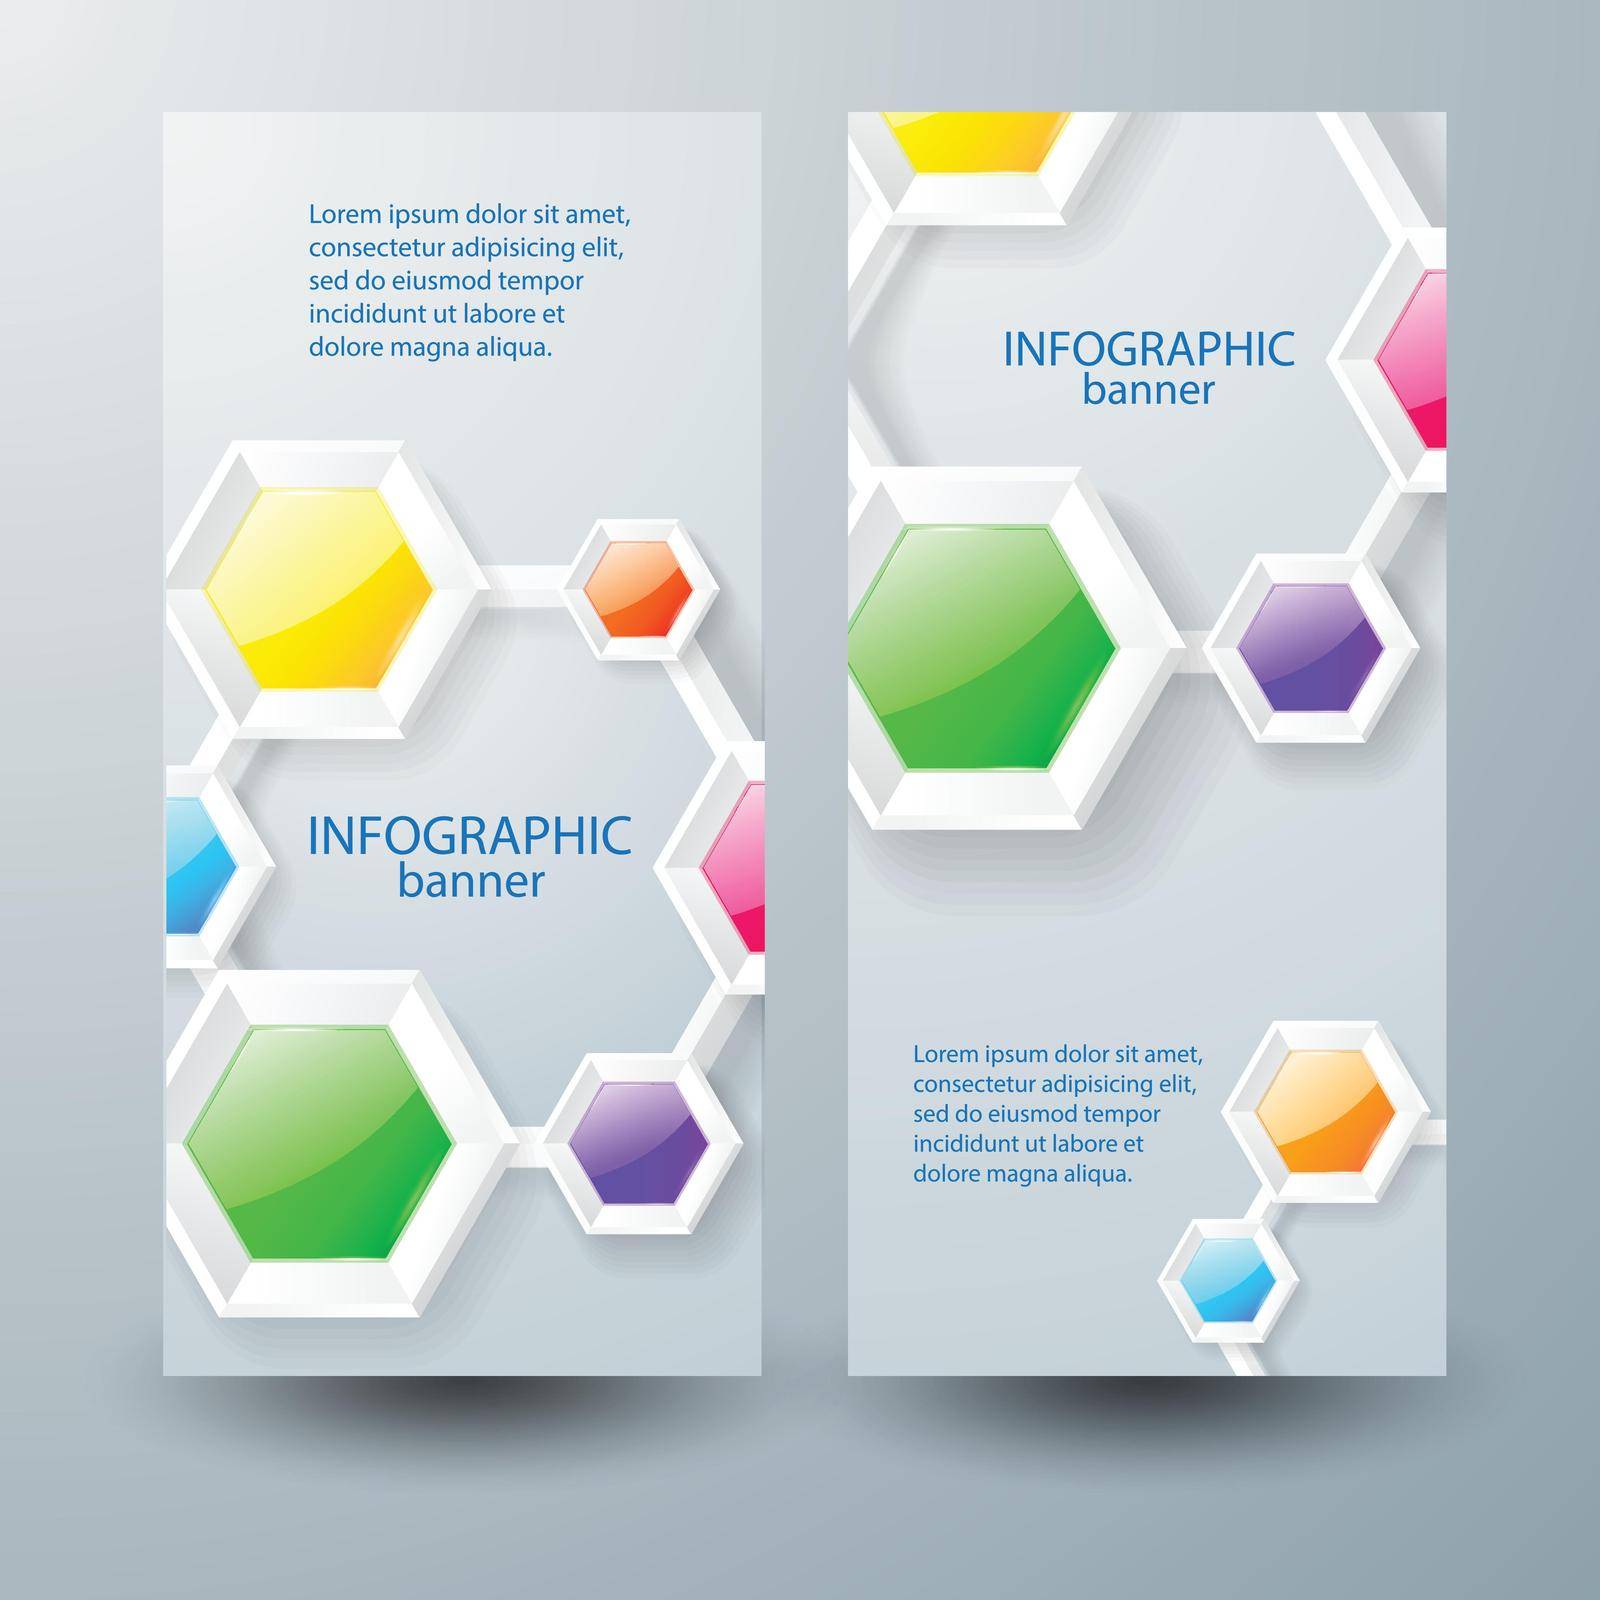 Abstract infographic business vertical banners with text colorful glossy connected hexagons on gray background isolated vector illustration